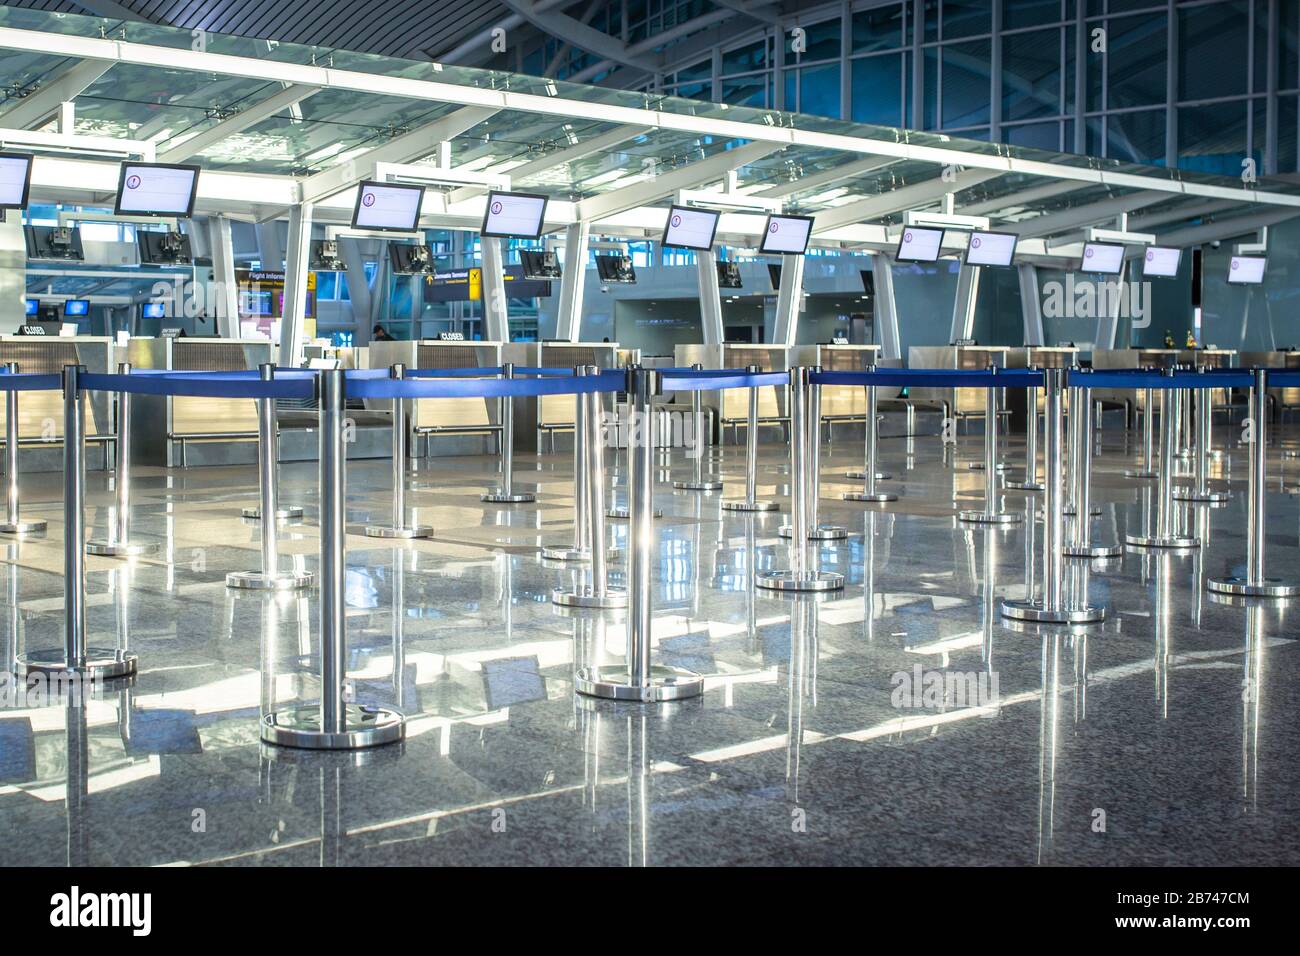 Empty check-in desks at the airport terminal. Stock Photo